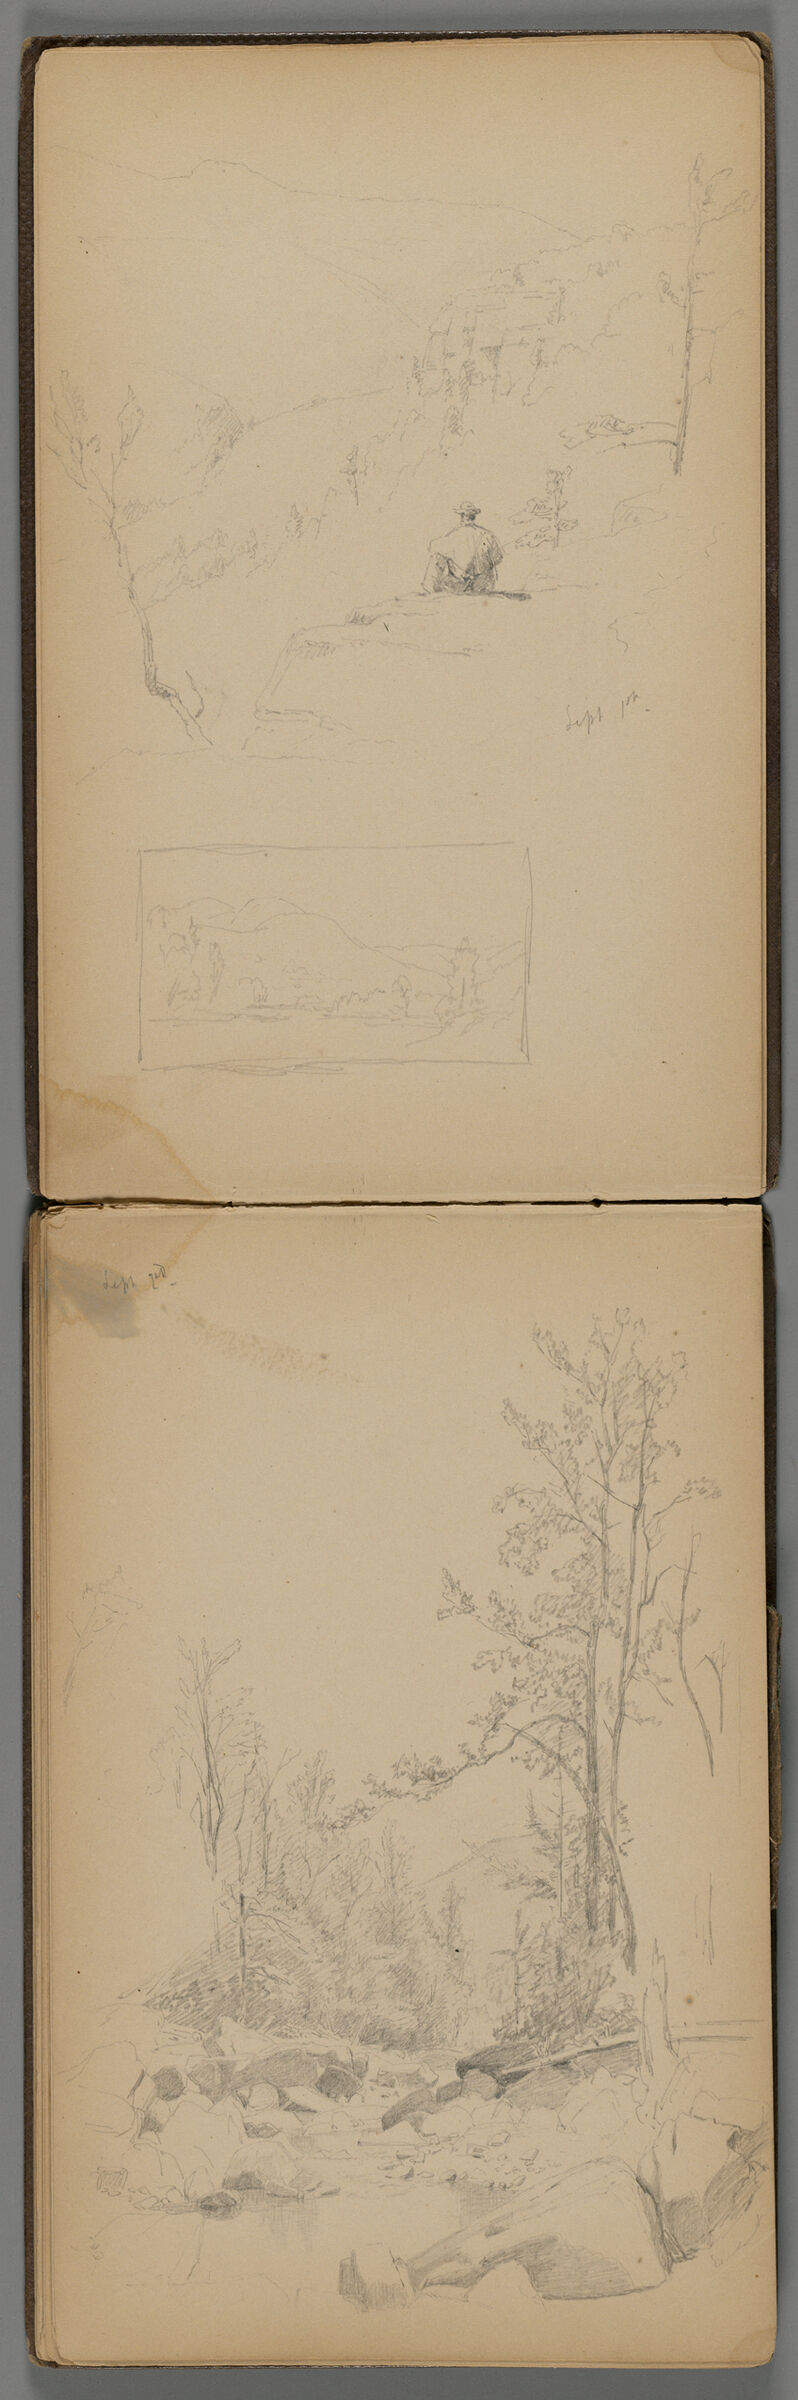 Landscape With Rocky Stream; Verso: Landscape With Log Cabin And Small Landscape